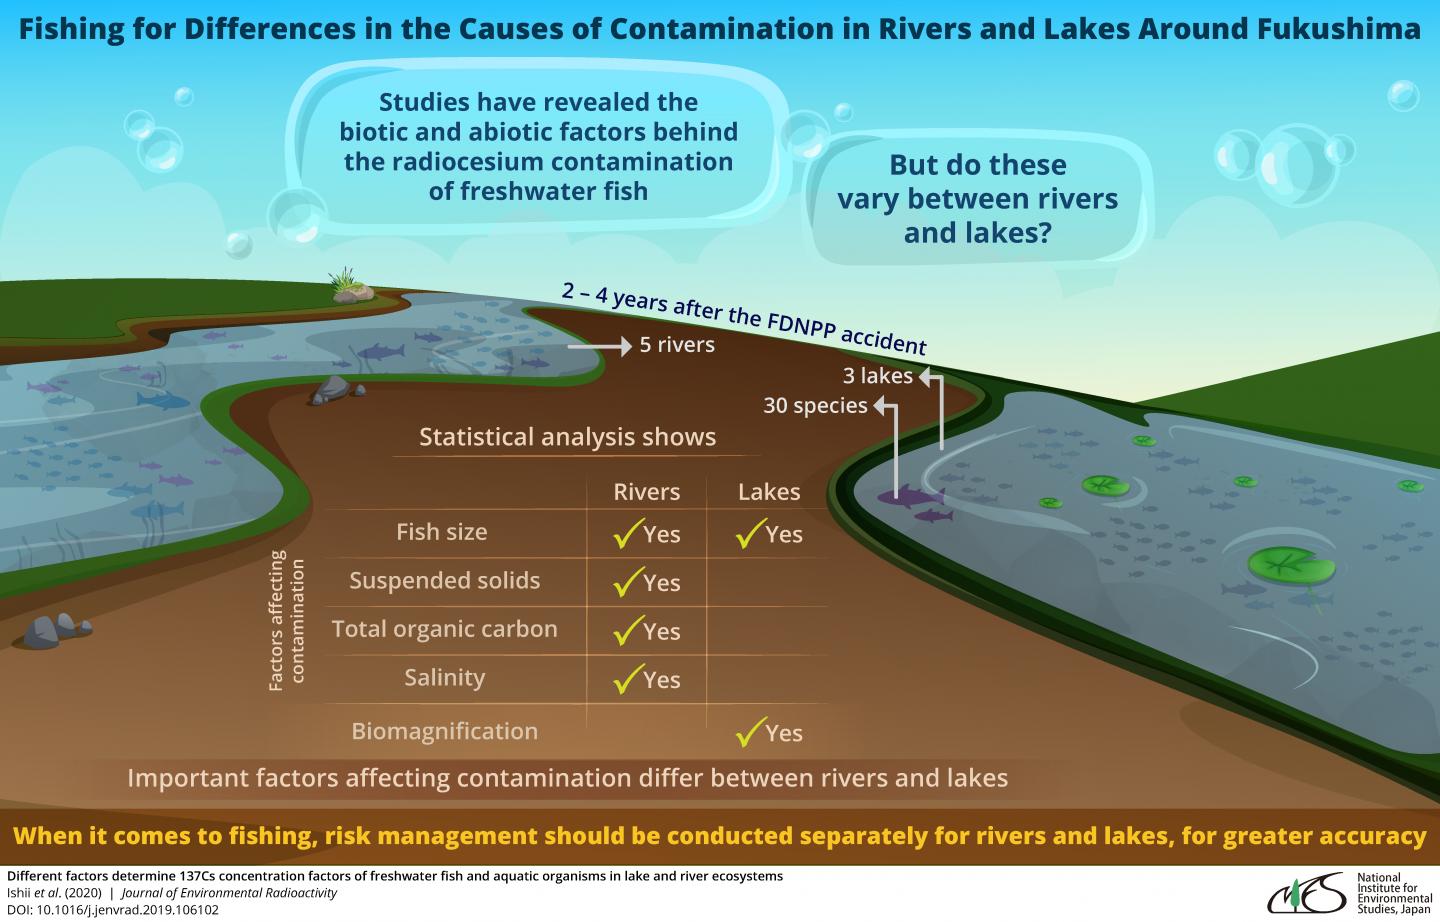 Fishing for Differences in the Causes of Contamination in Rivers and Lakes Around Fukushima